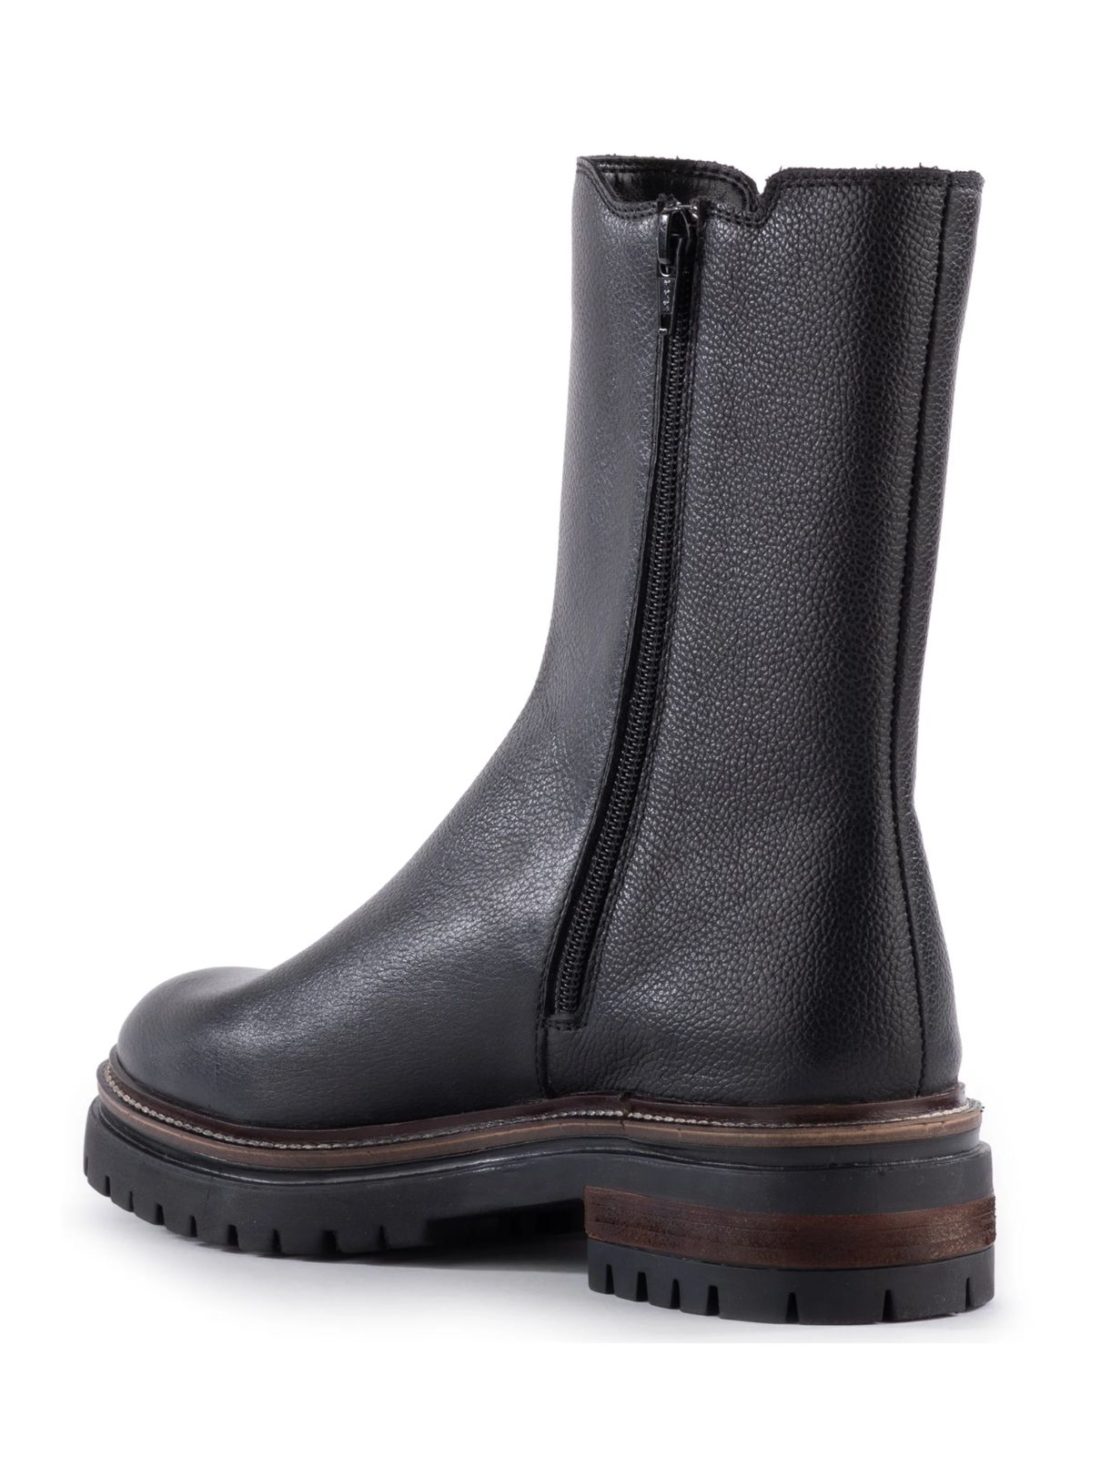 seychelles cover me up boot in black